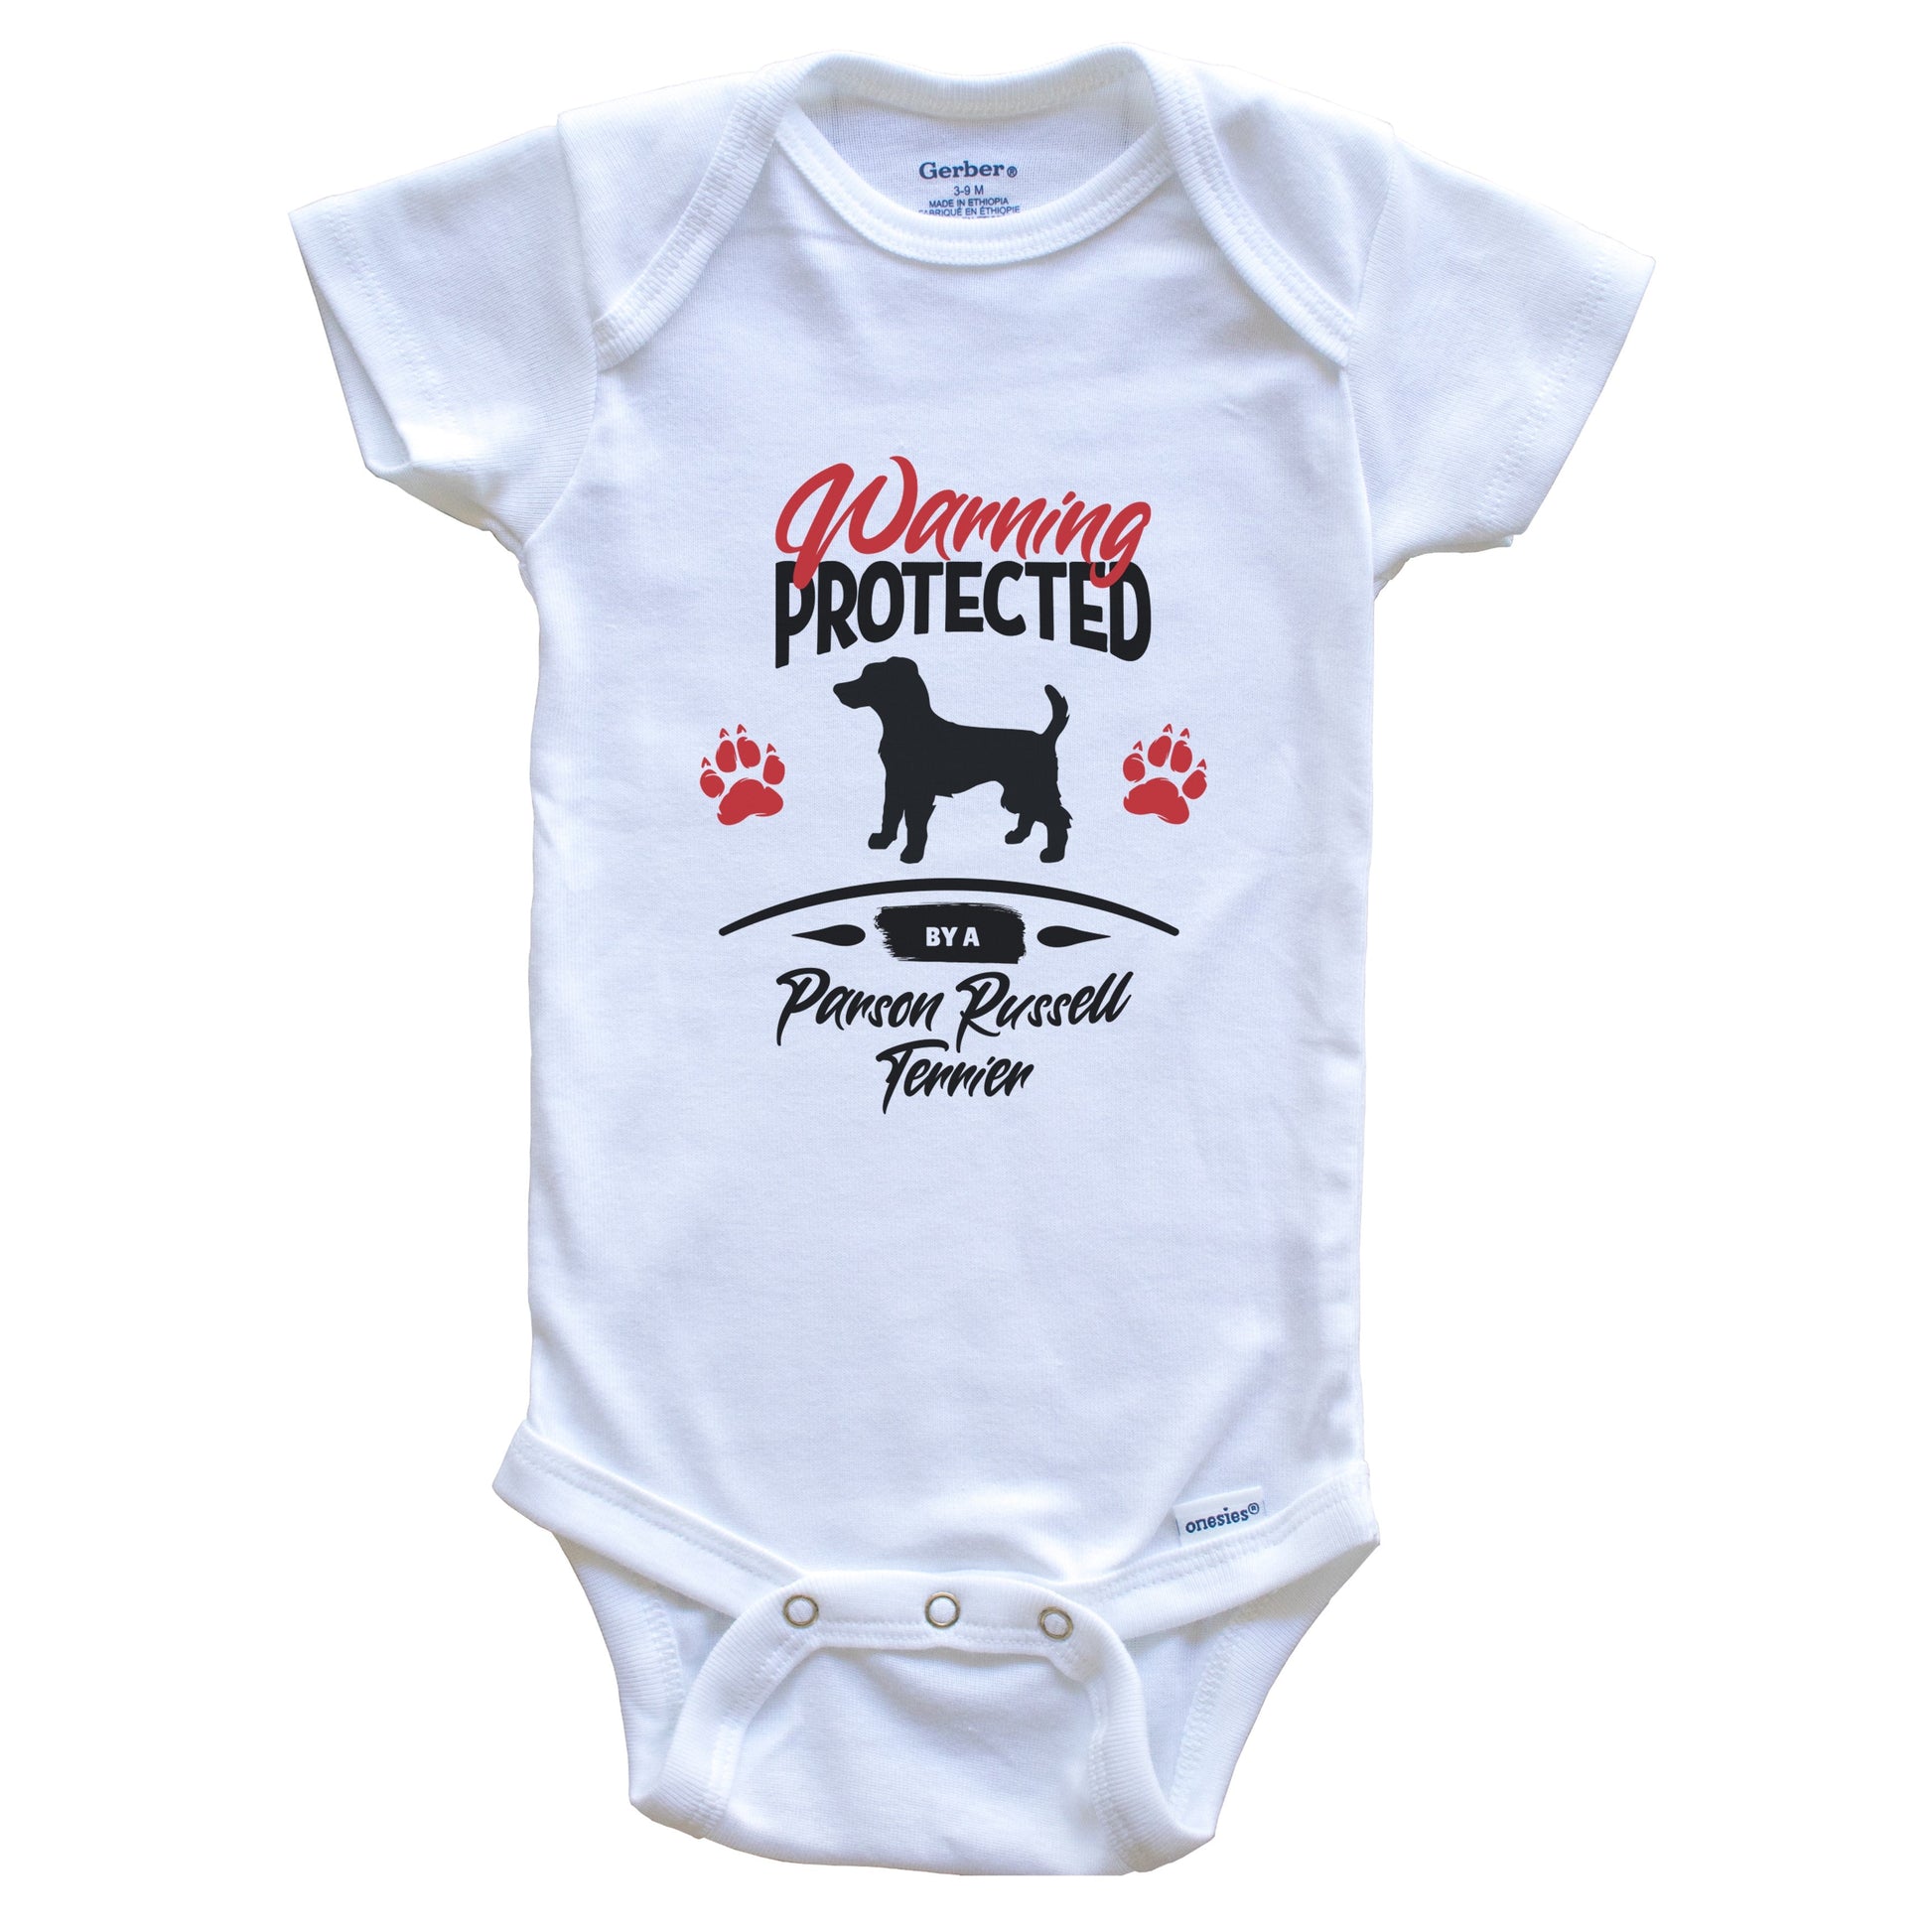 Warning Protected By A Parson Russell Terrier Funny Dog Baby Bodysuit